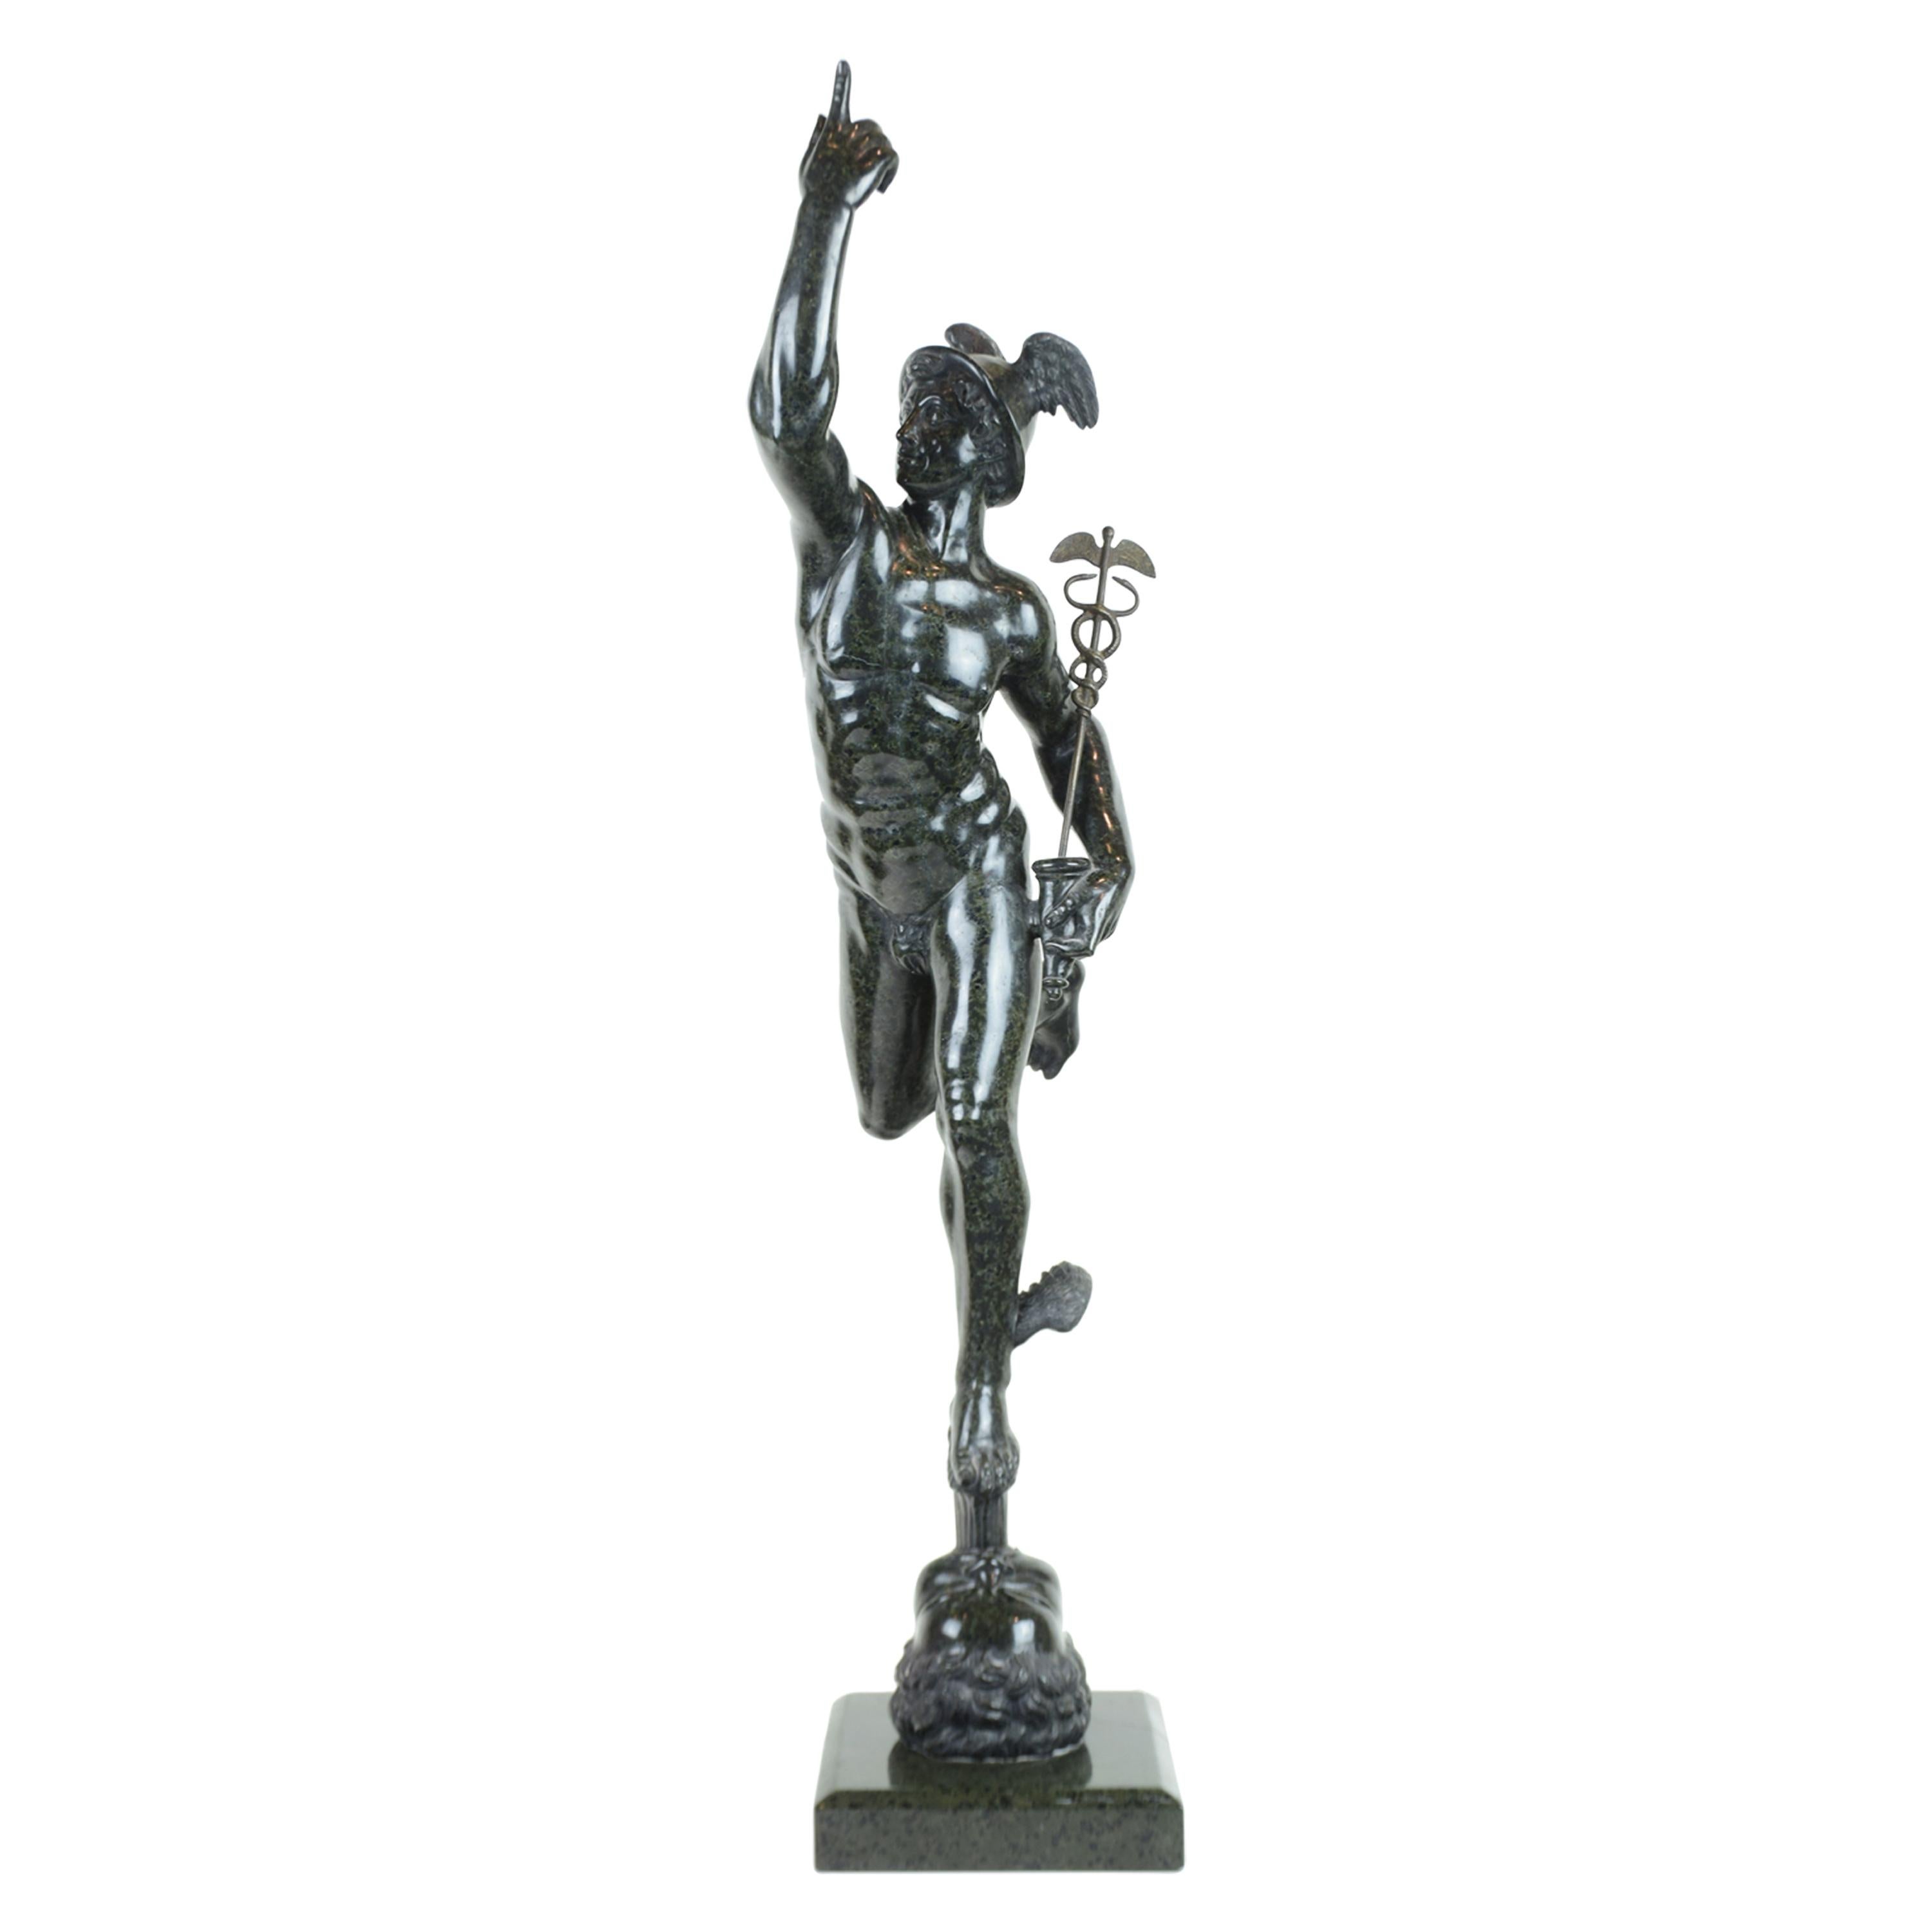 Flying Mercury in green marble copied from the famous work of Giambologna